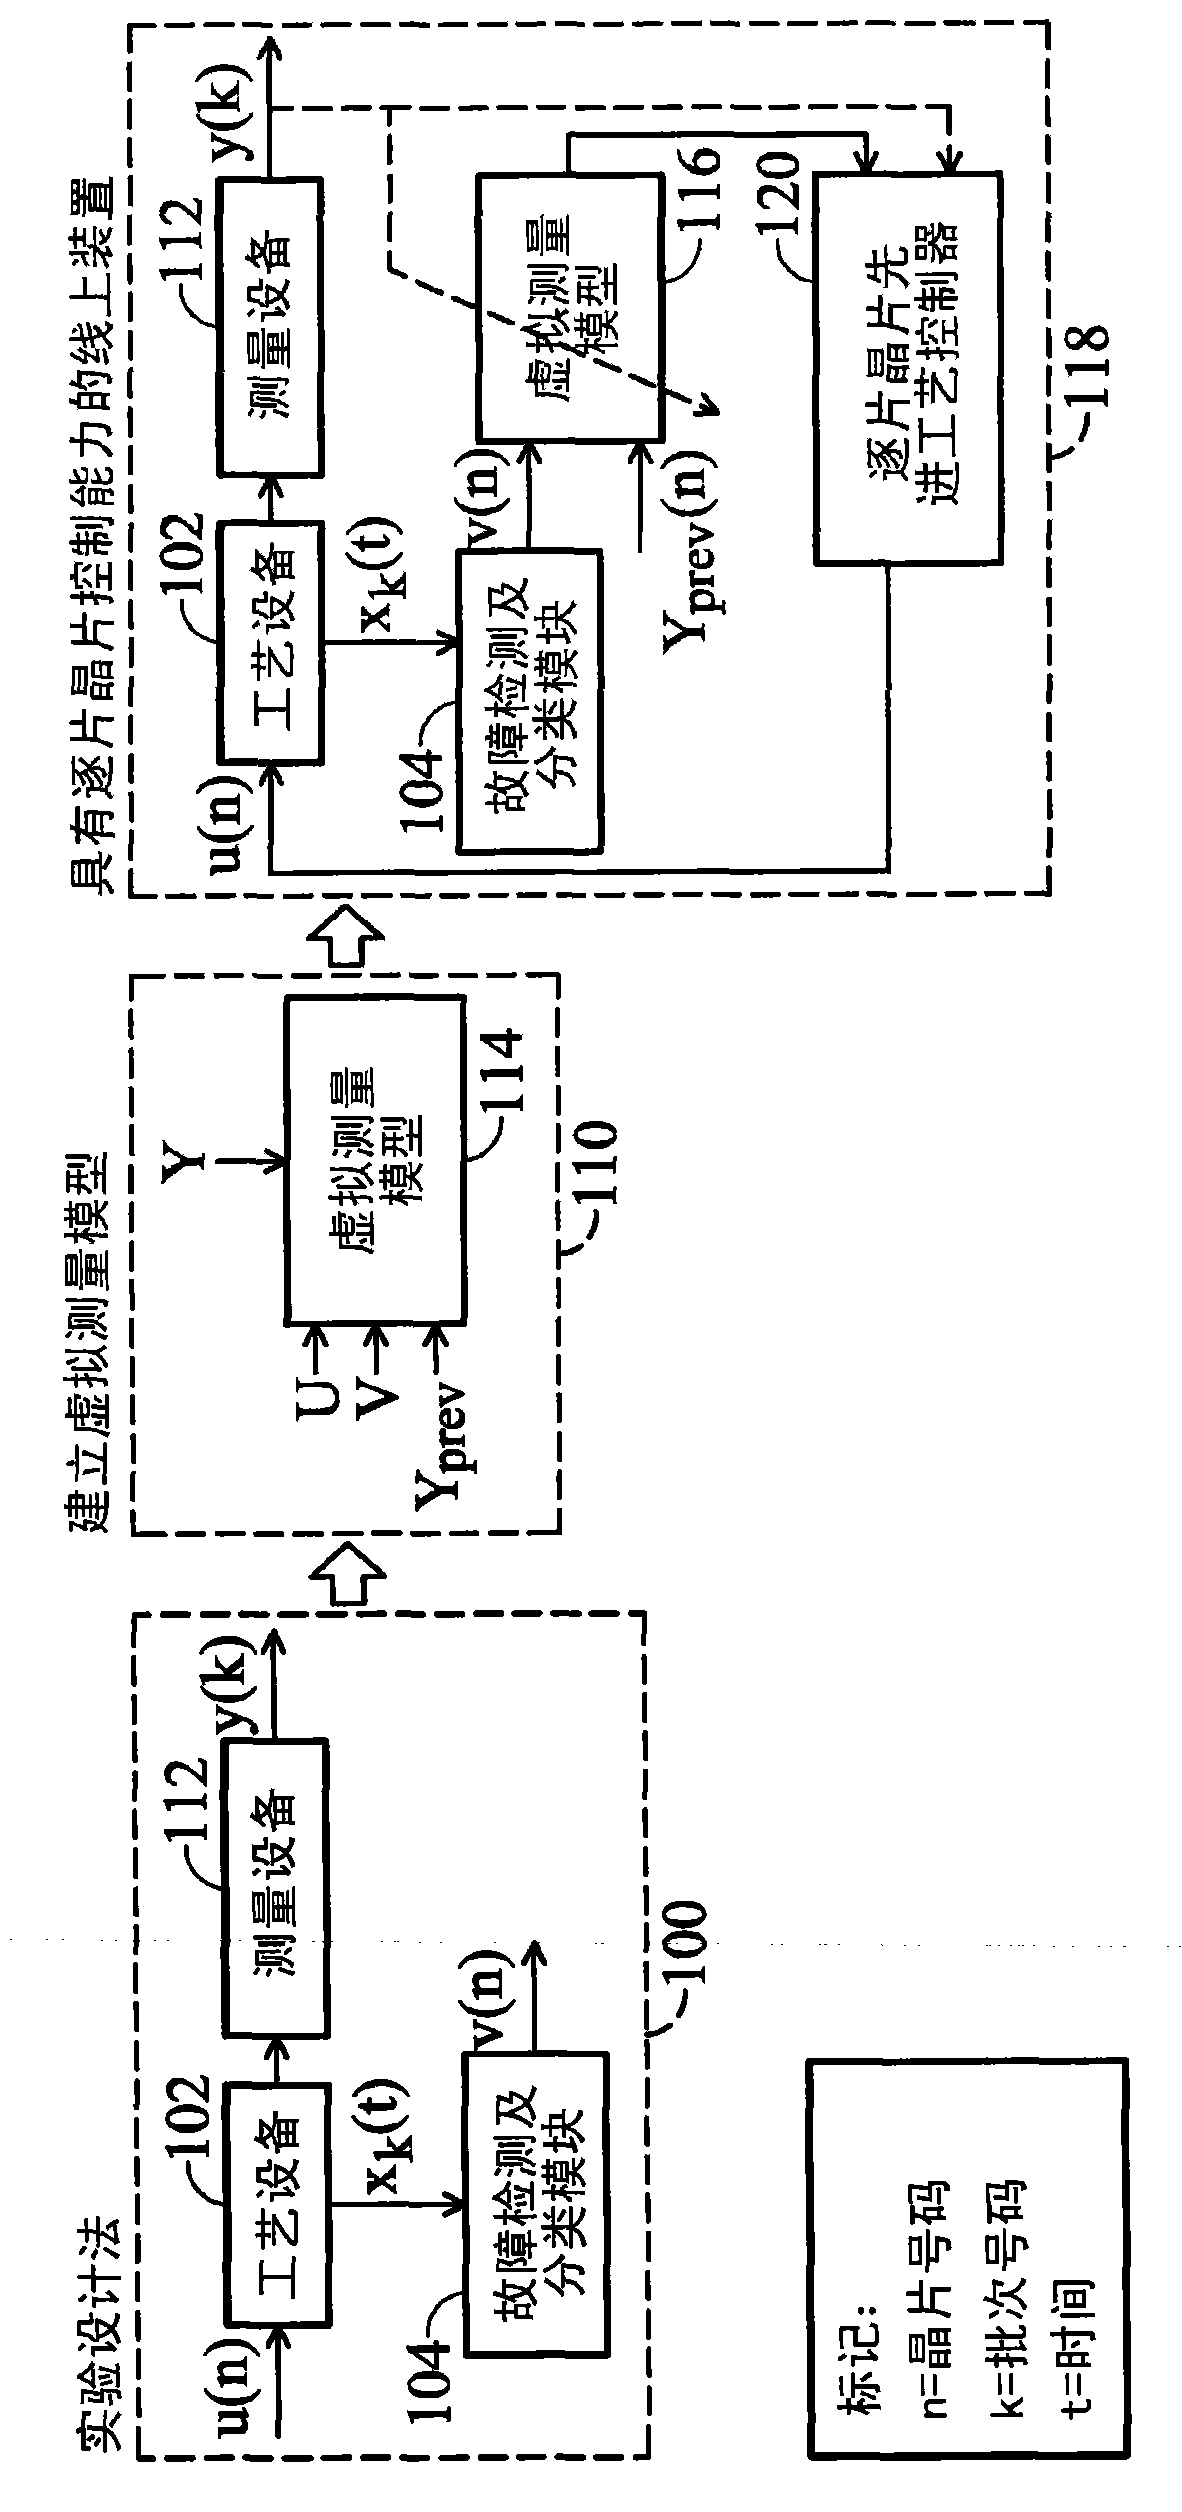 System and method for implementing a virtual metrology advanced process control platform